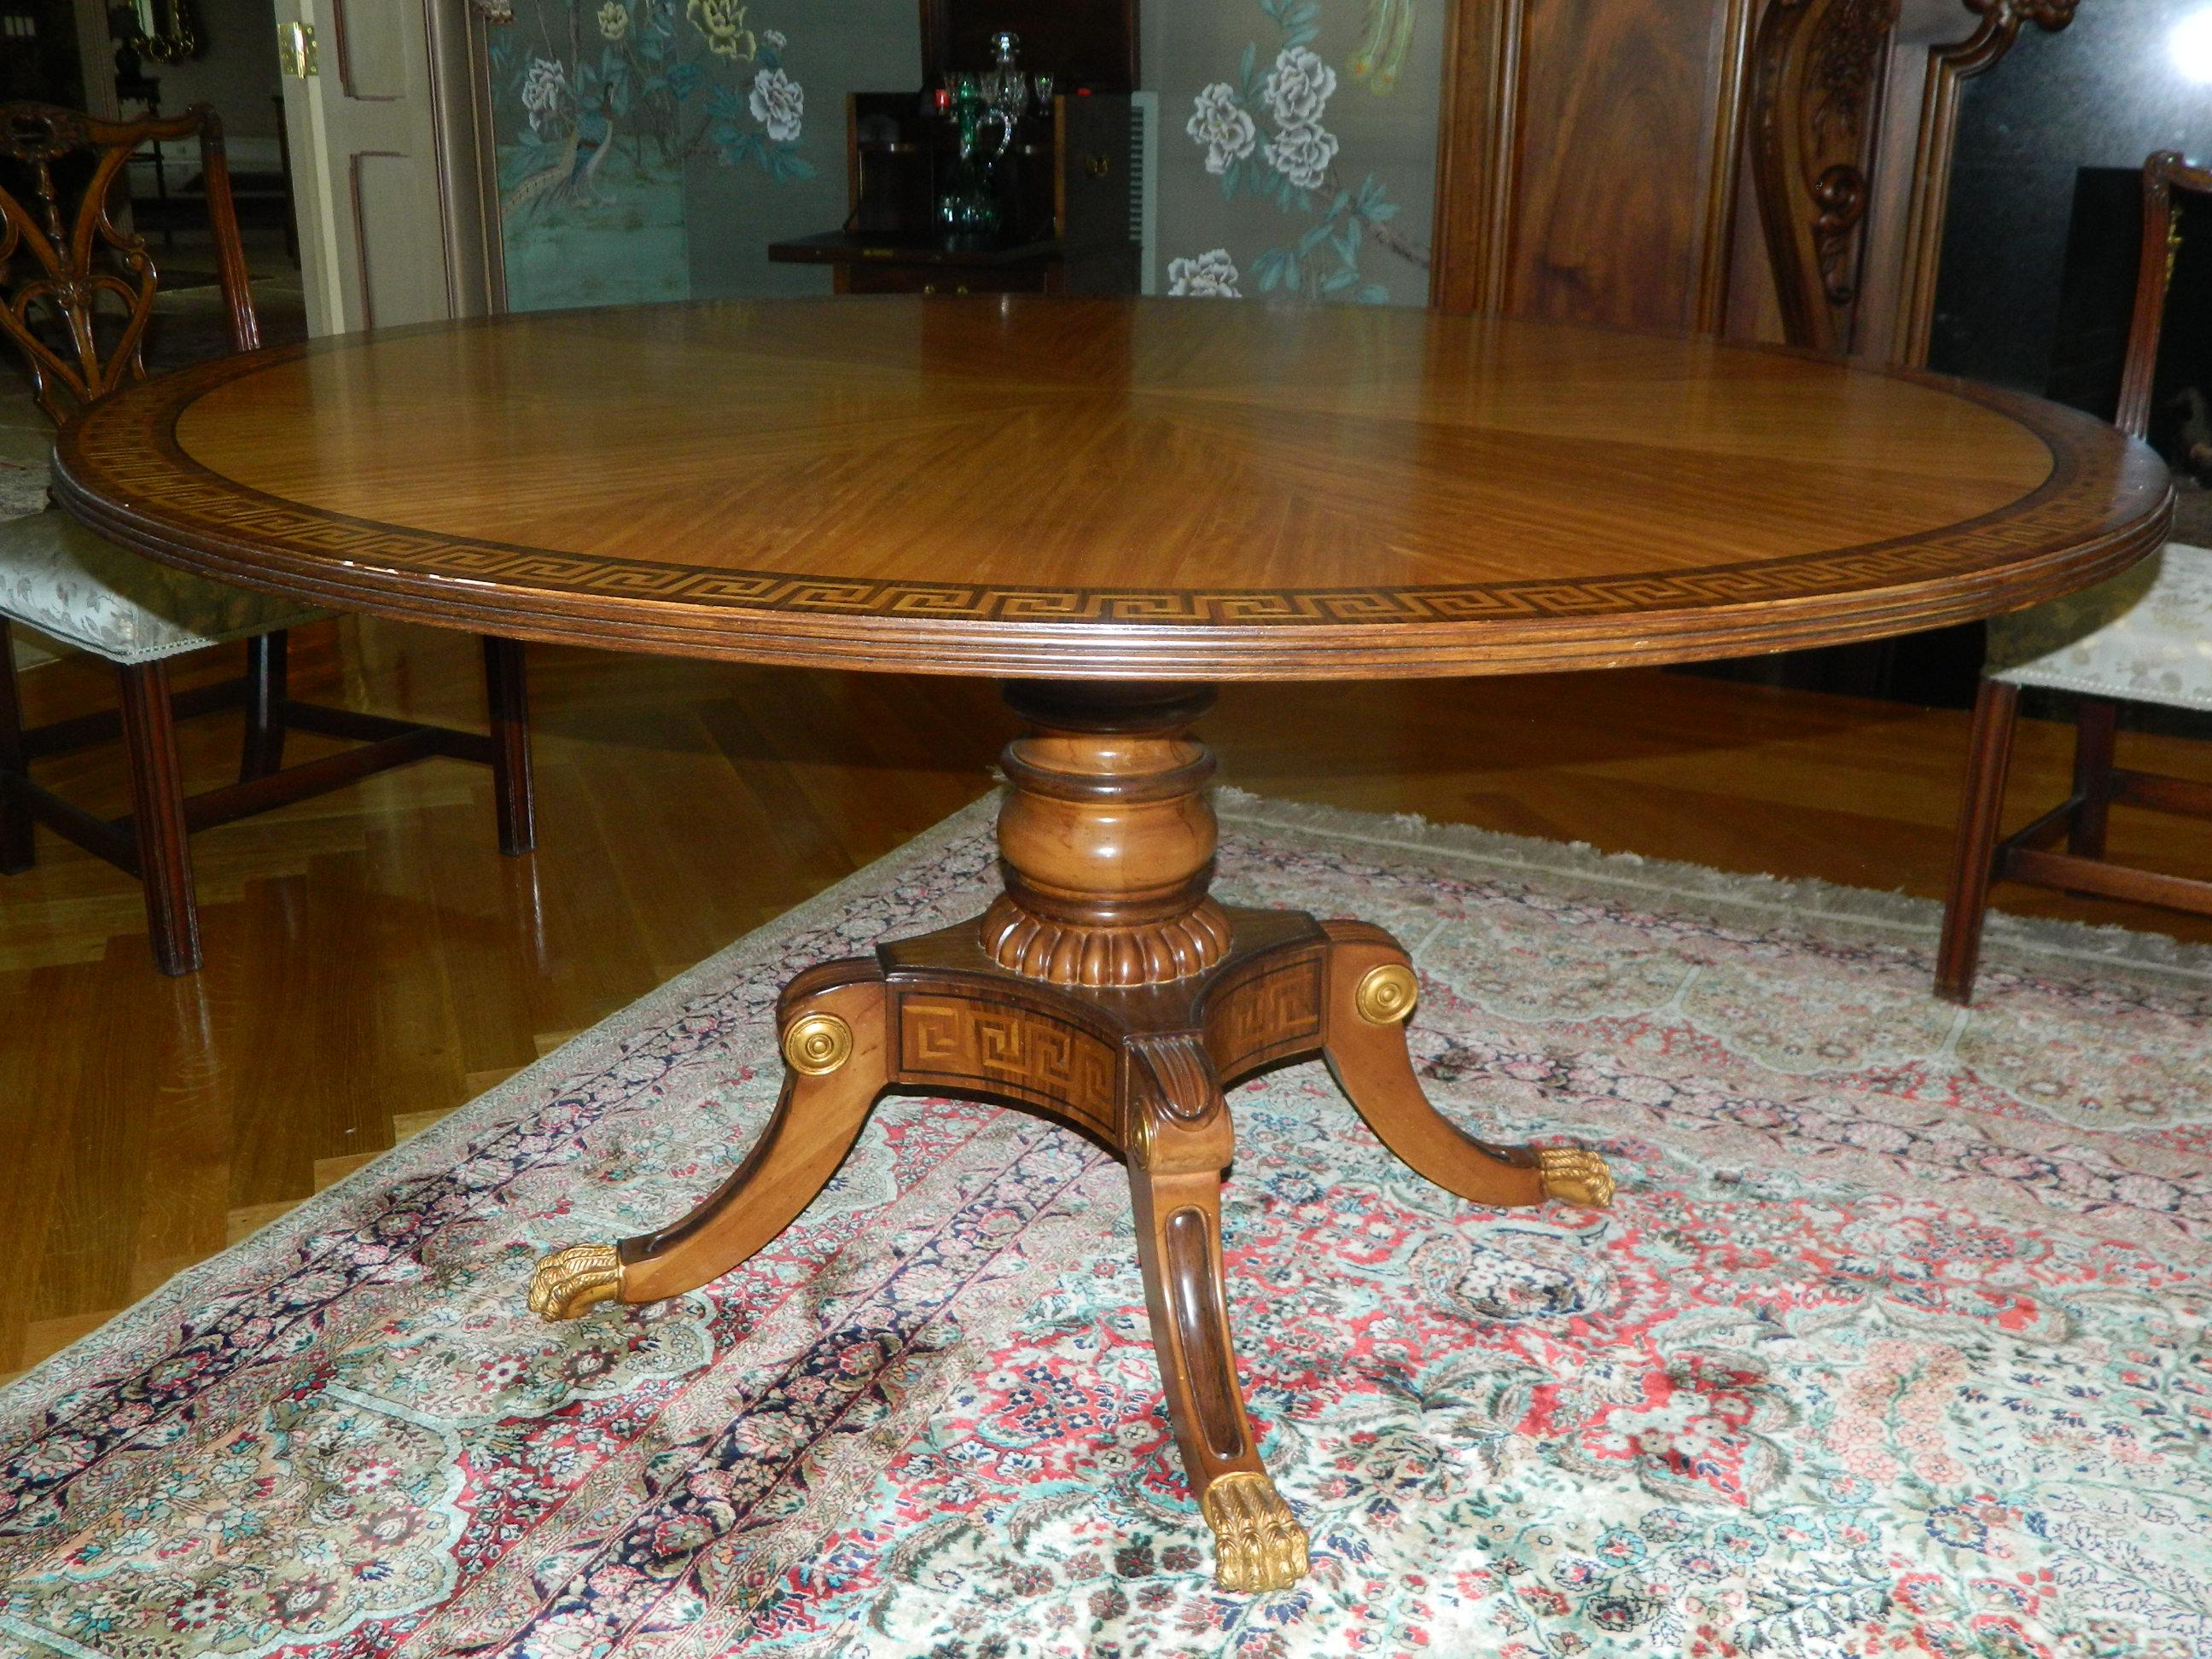 20th century mahogany round table with Greek key inlay on a decorative pedestal and gold painted paw feet.
  